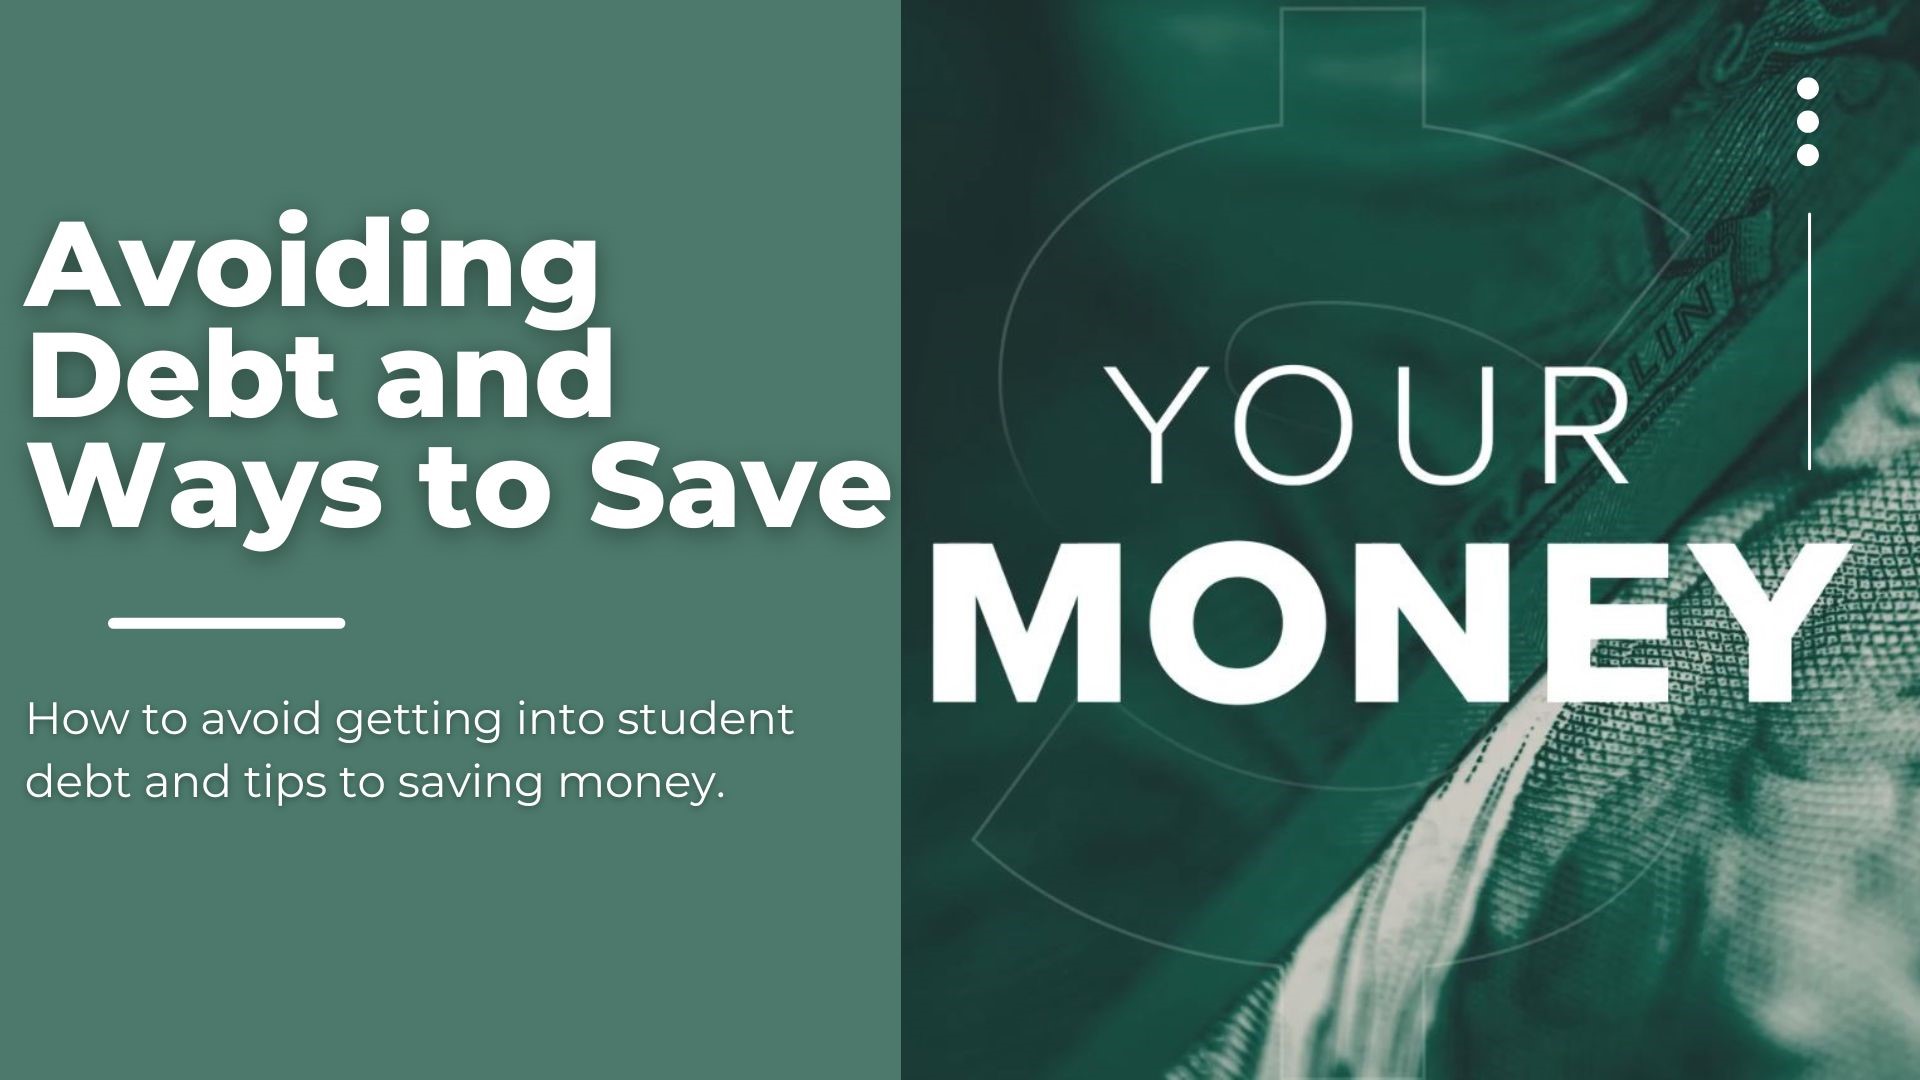 A look at how you can avoid student debt through financial literacy, scholarships and grants. Plus tips on saving when it comes to credit cards and AARP.